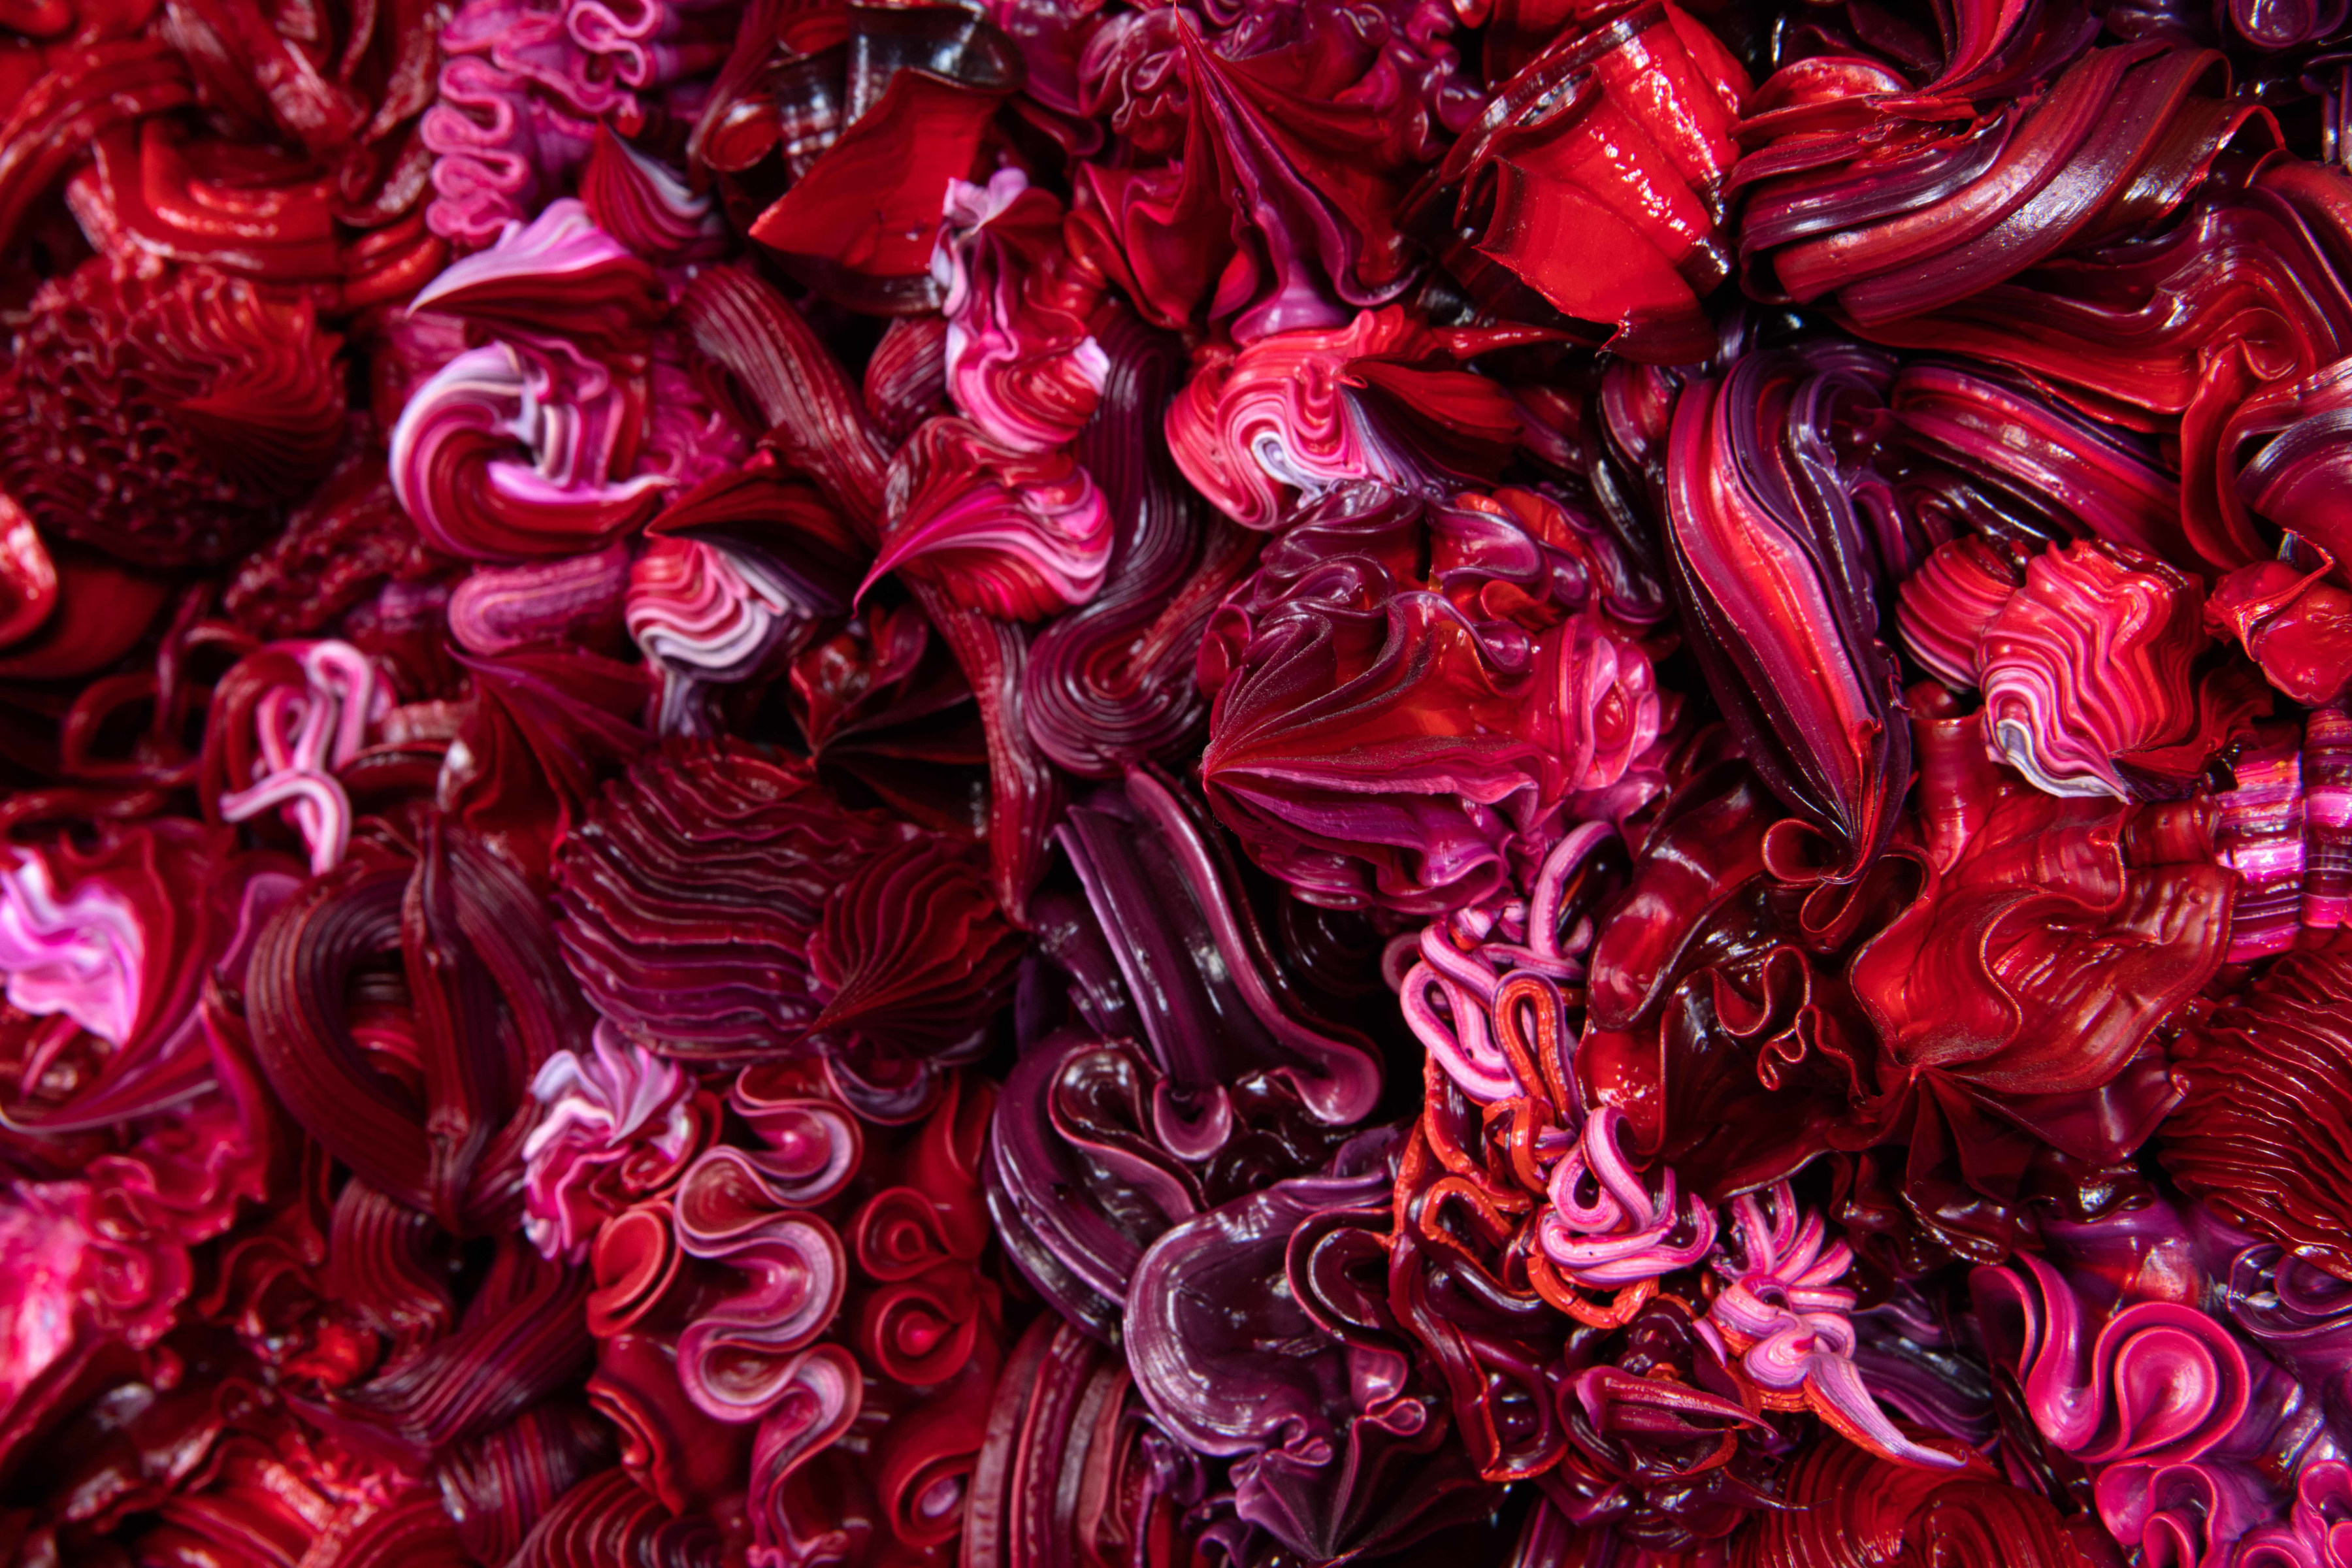 A zoomed in detail of dark red and purple whipped-cream-like dollops made of acrylic